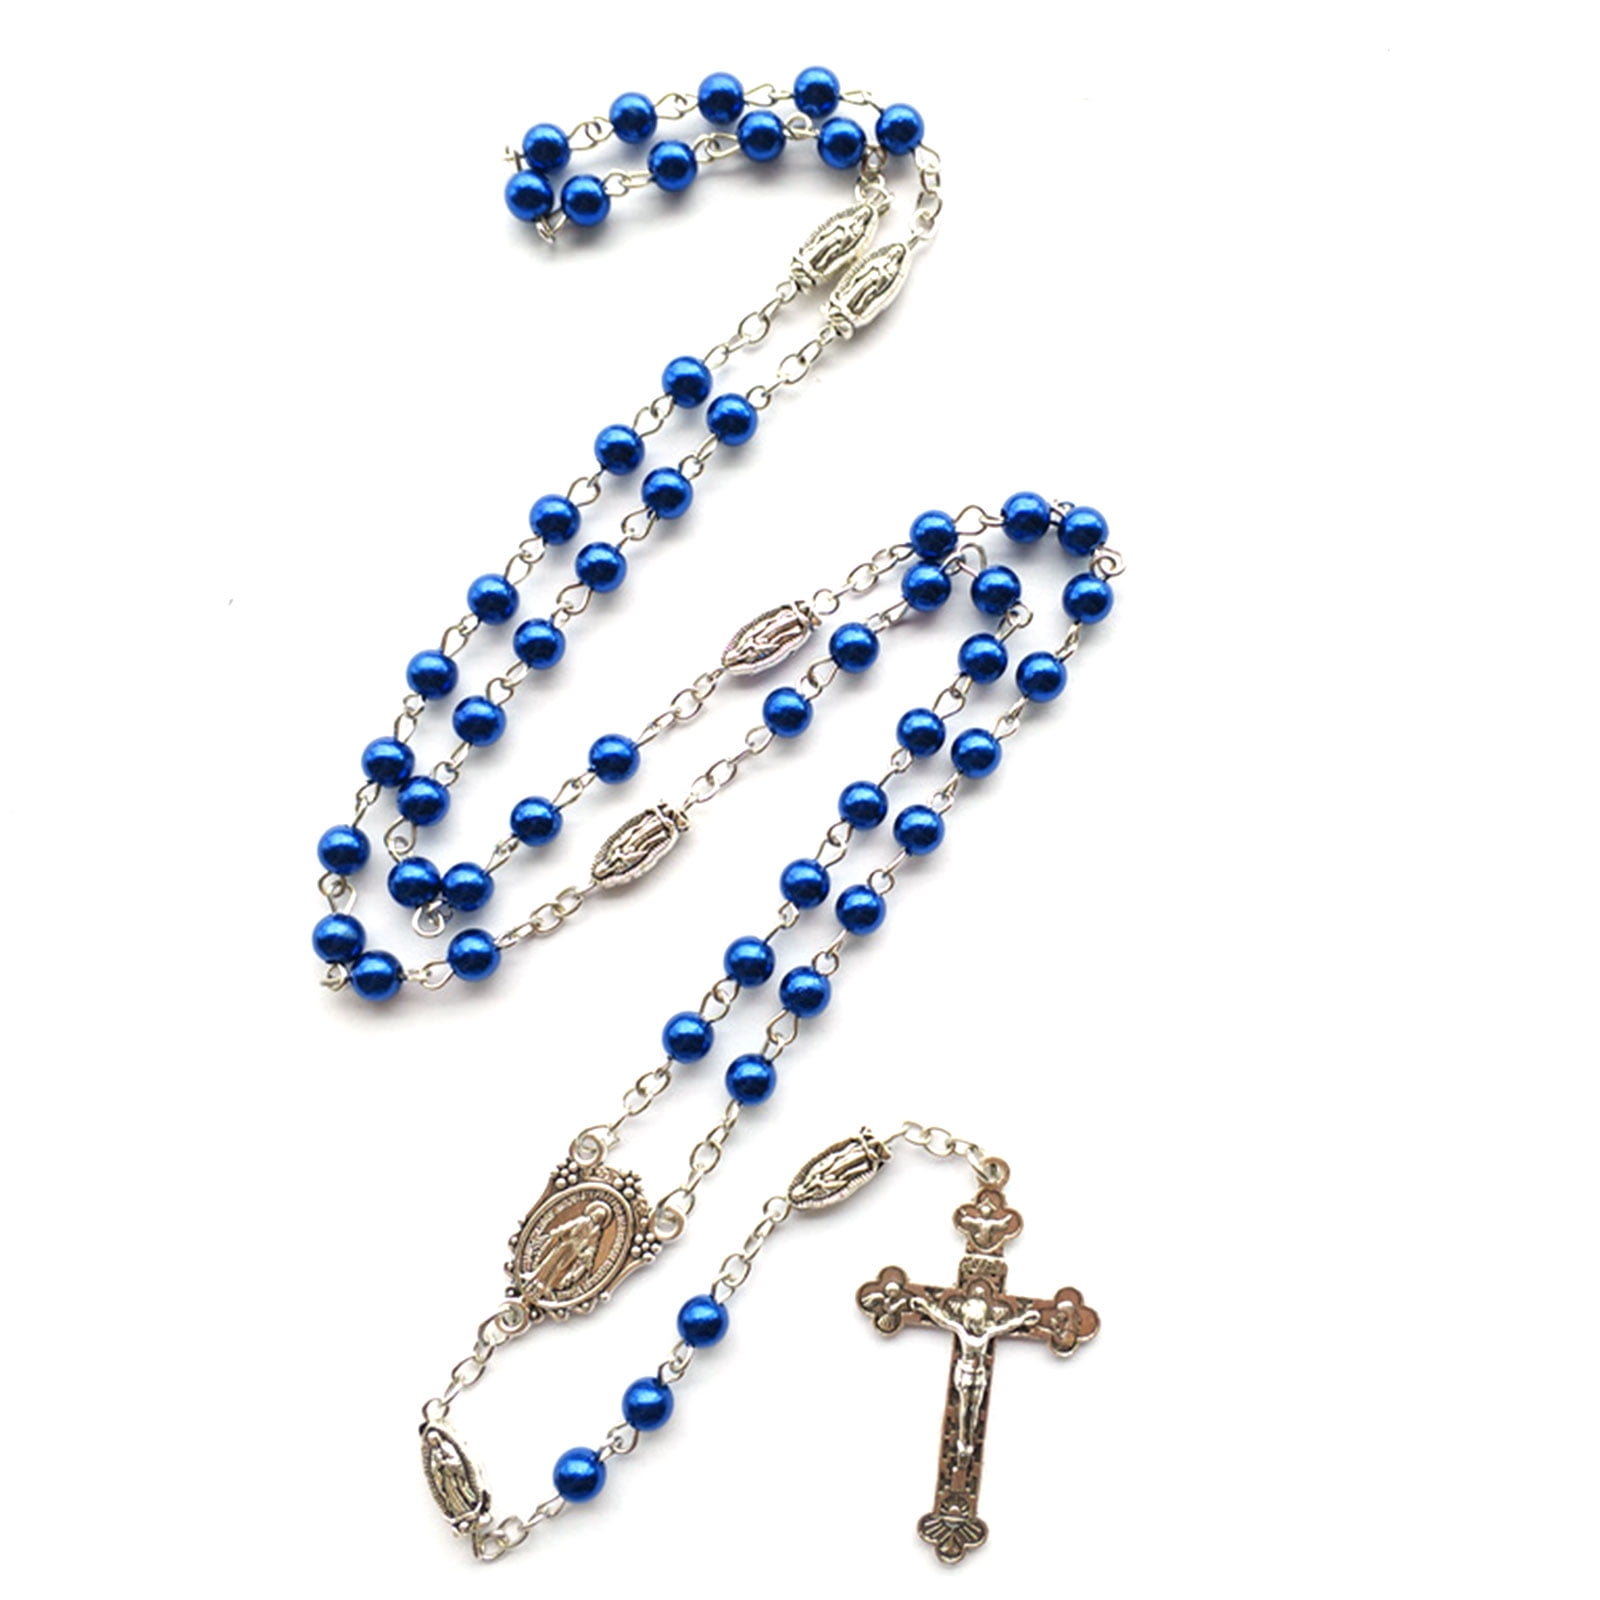 Rosary Beads Necklace with Crucifix and Jesus Medal Catholic